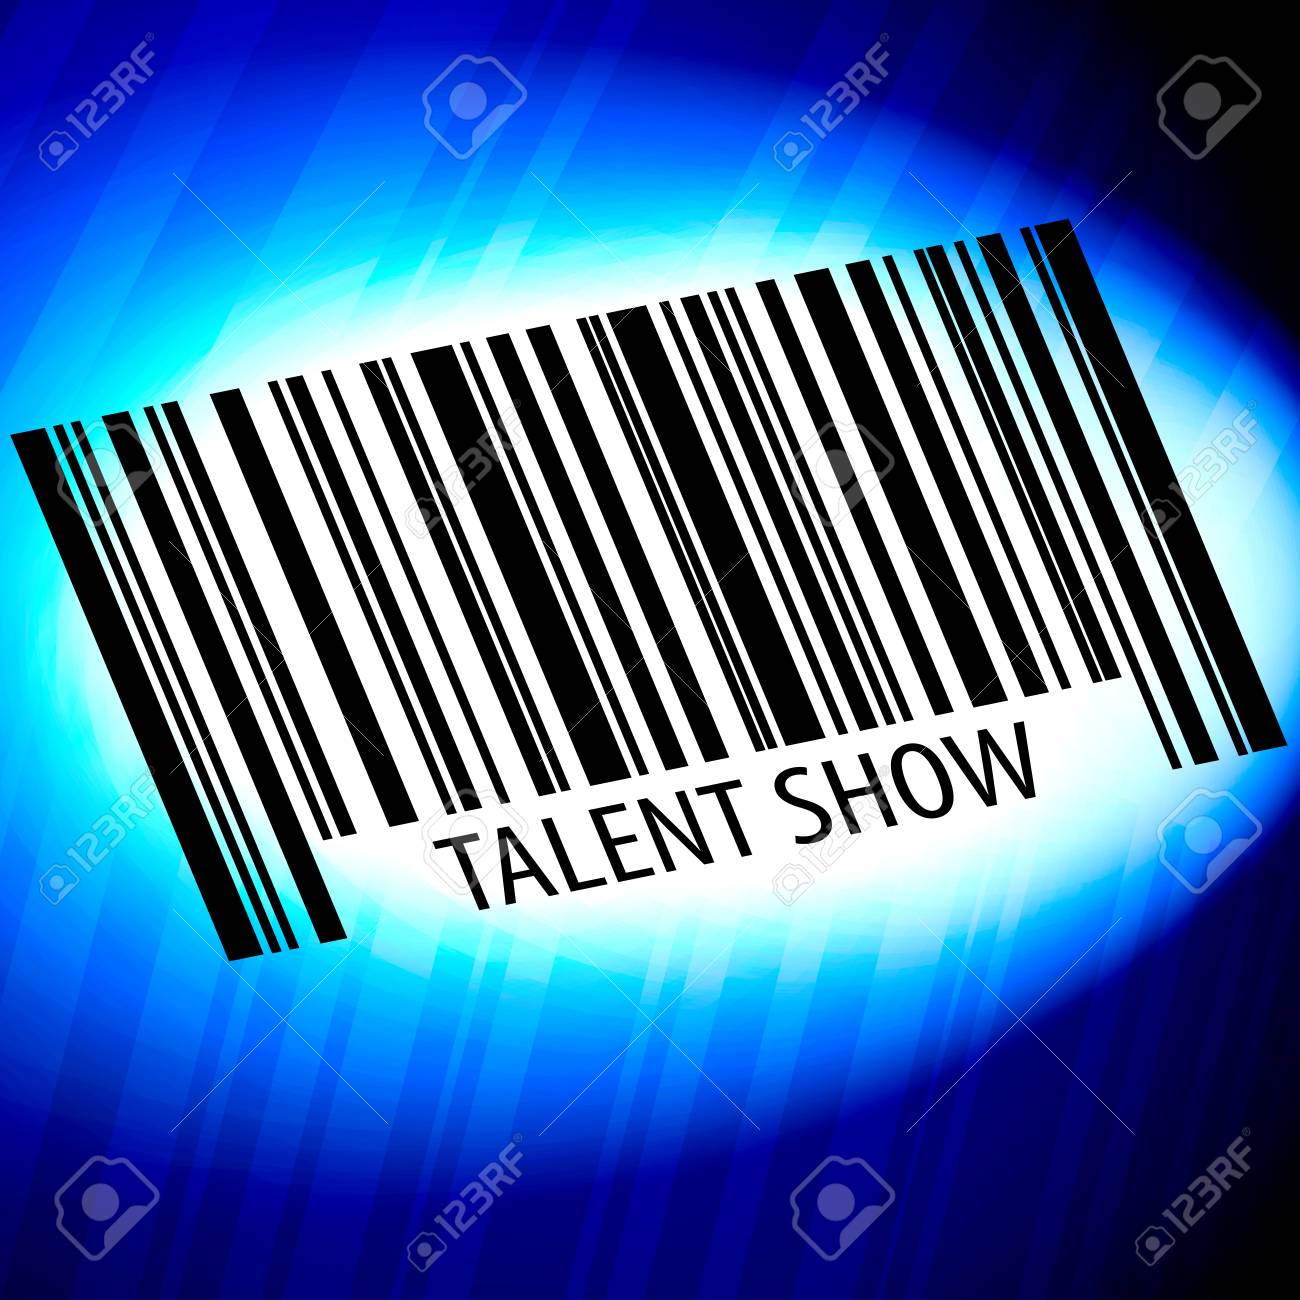 Talent Show Barcode With Blue Background Stock Photo Picture